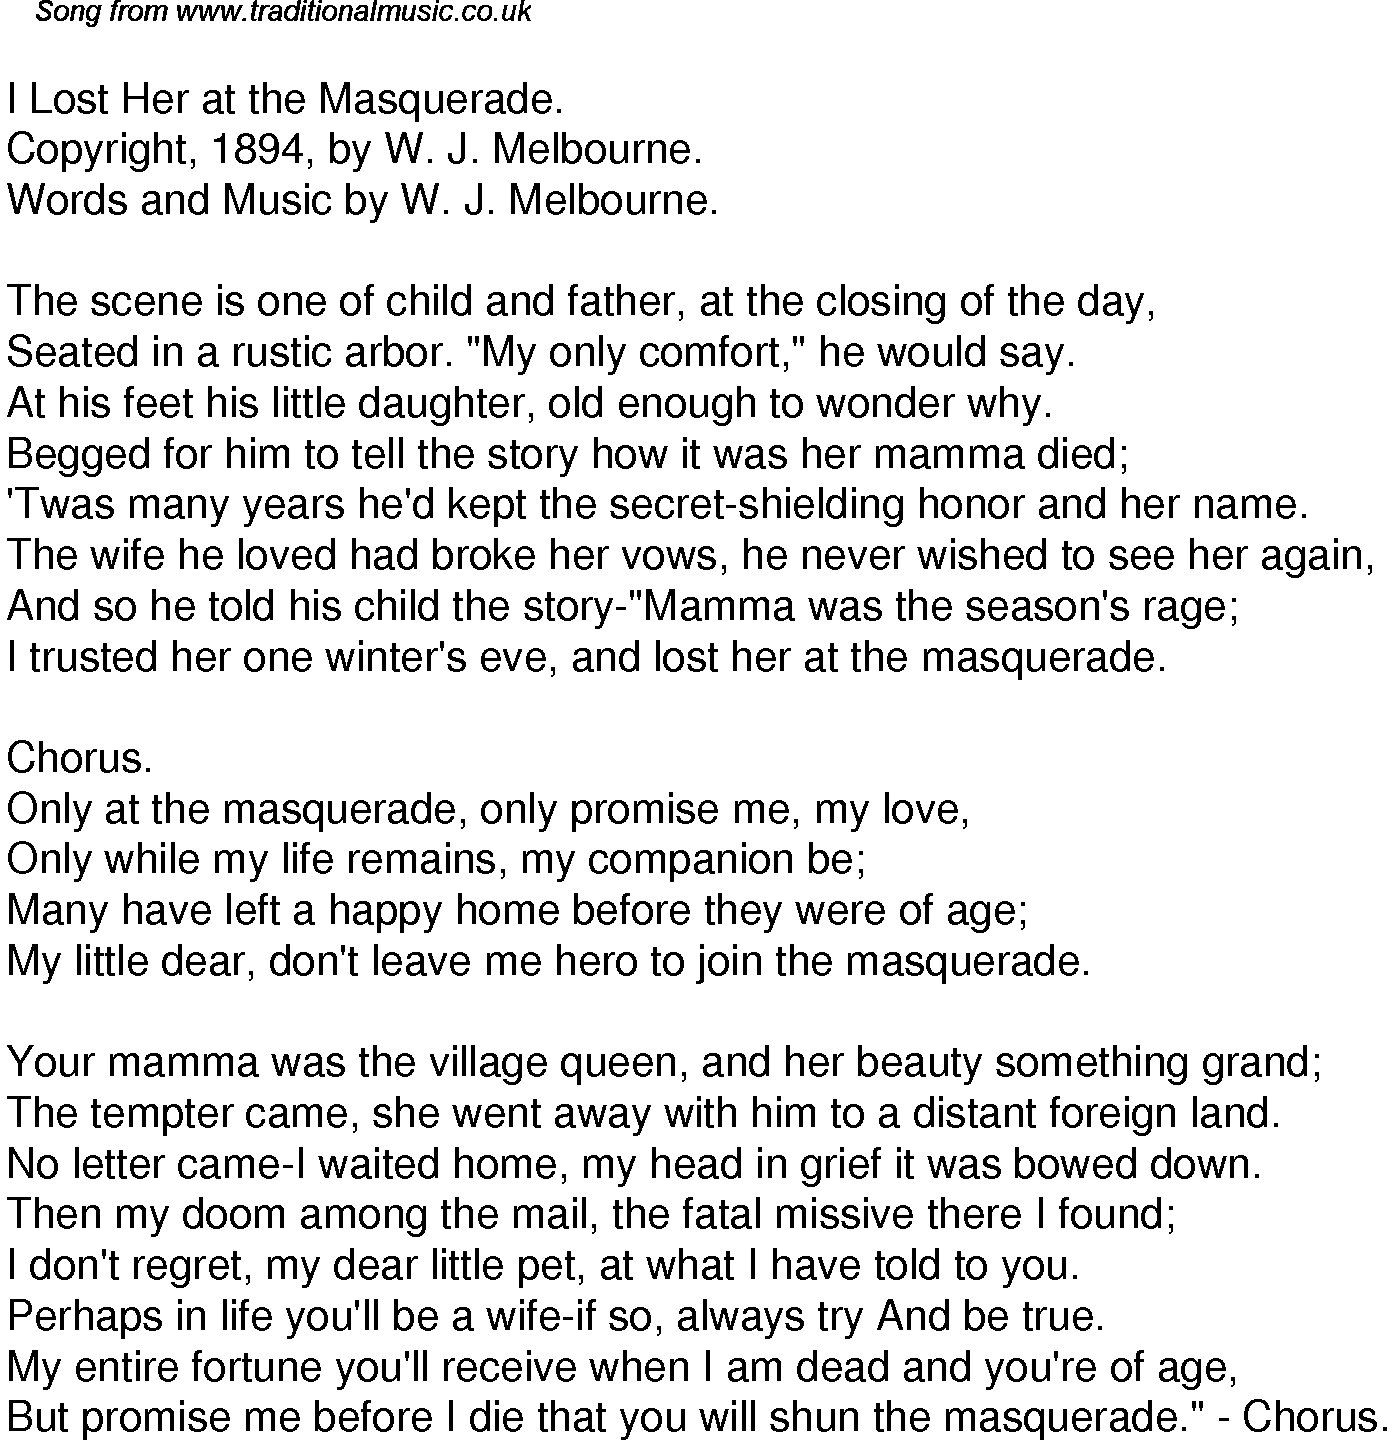 Old Time Song Lyrics for 44 I Lost Her At The Masquerade